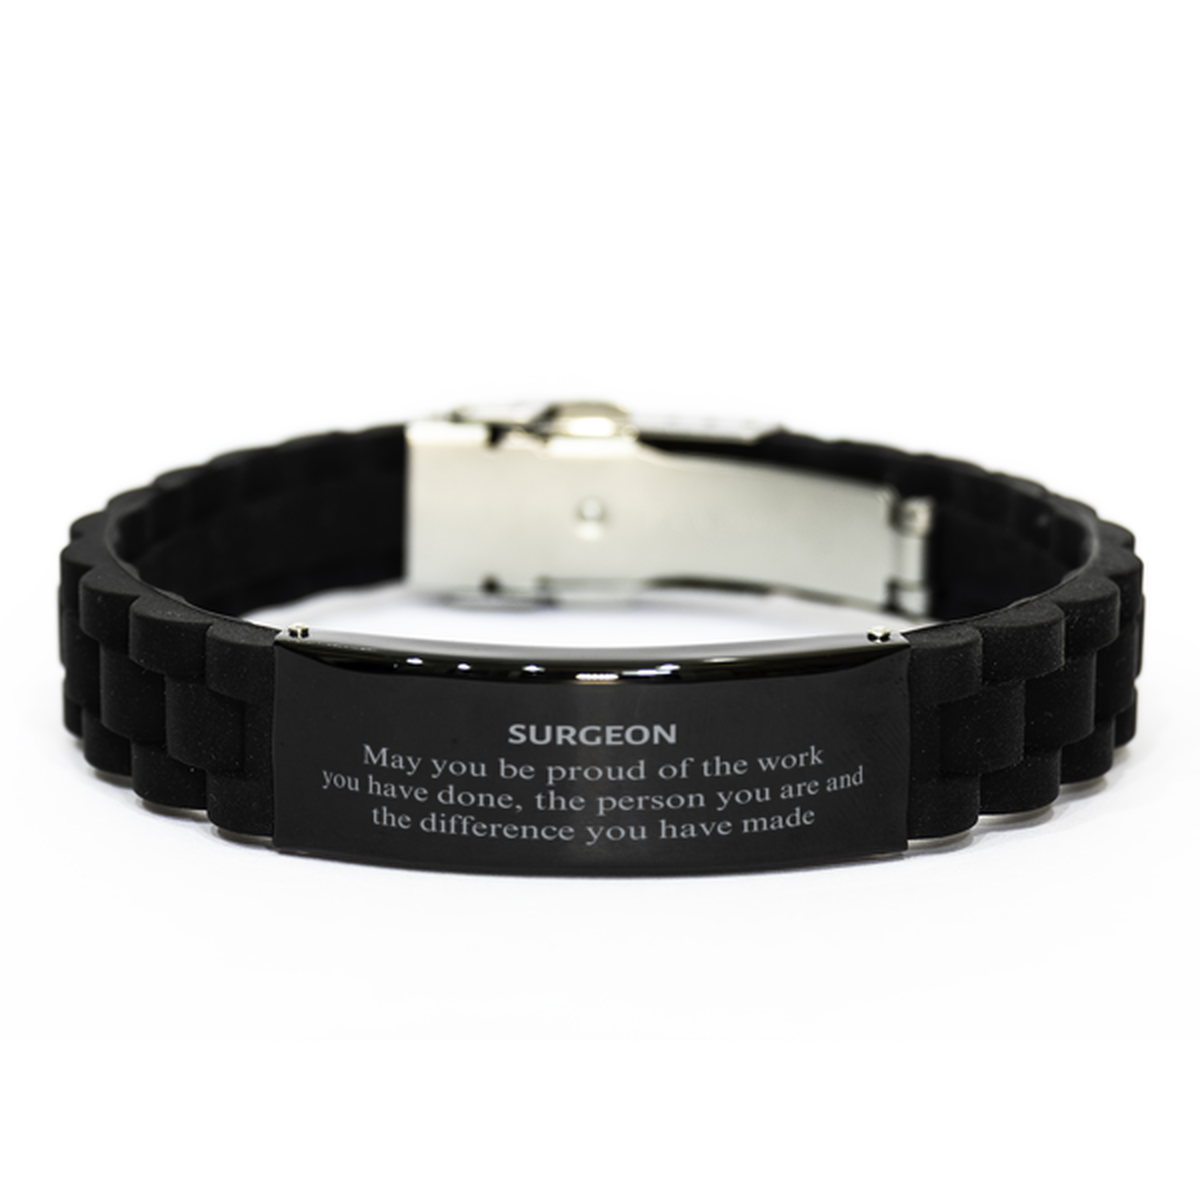 Surgeon May you be proud of the work you have done, Retirement Surgeon Black Glidelock Clasp Bracelet for Colleague Appreciation Gifts Amazing for Surgeon